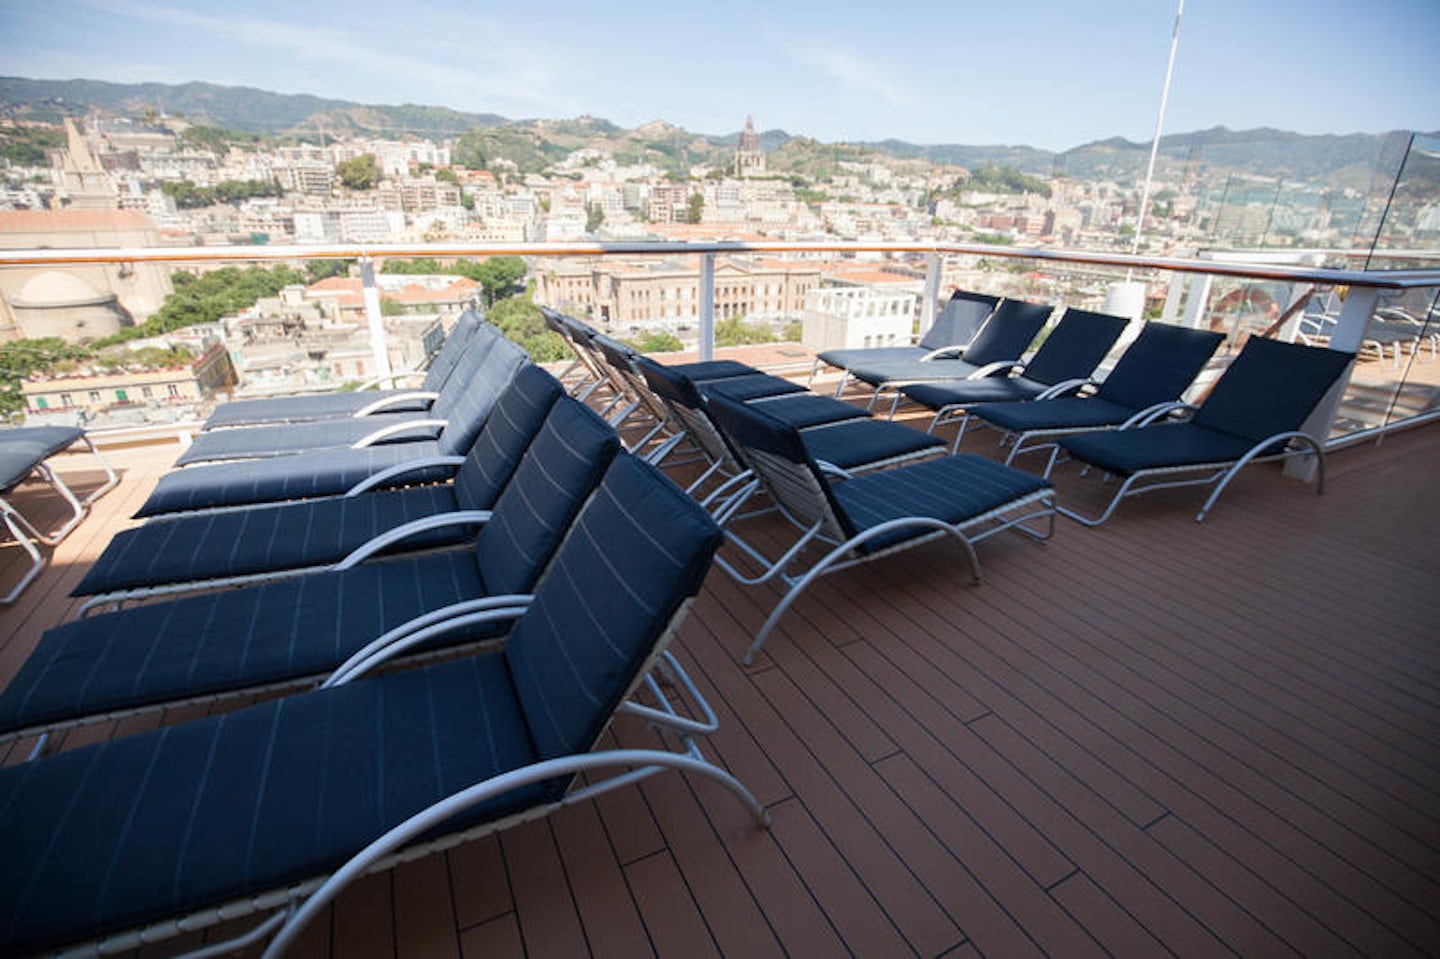 The Solstice Deck on Celebrity Reflection